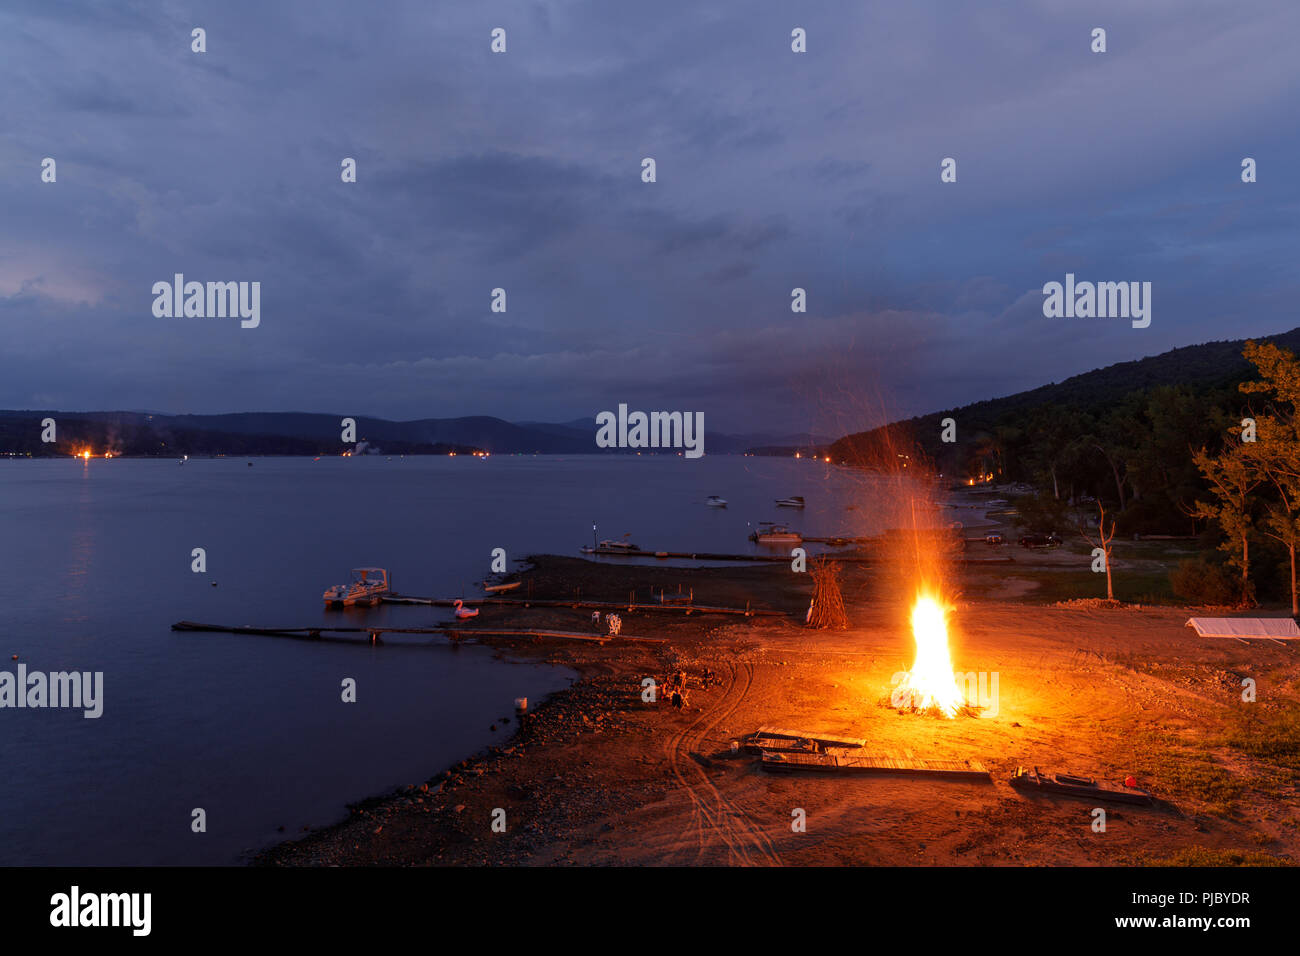 Summer ends with a 'Ring of Fire' on Labor Day weekend, bonfires lit along the shores of Great Sacandaga Lake, southern Adirondacks, New York State. Stock Photo